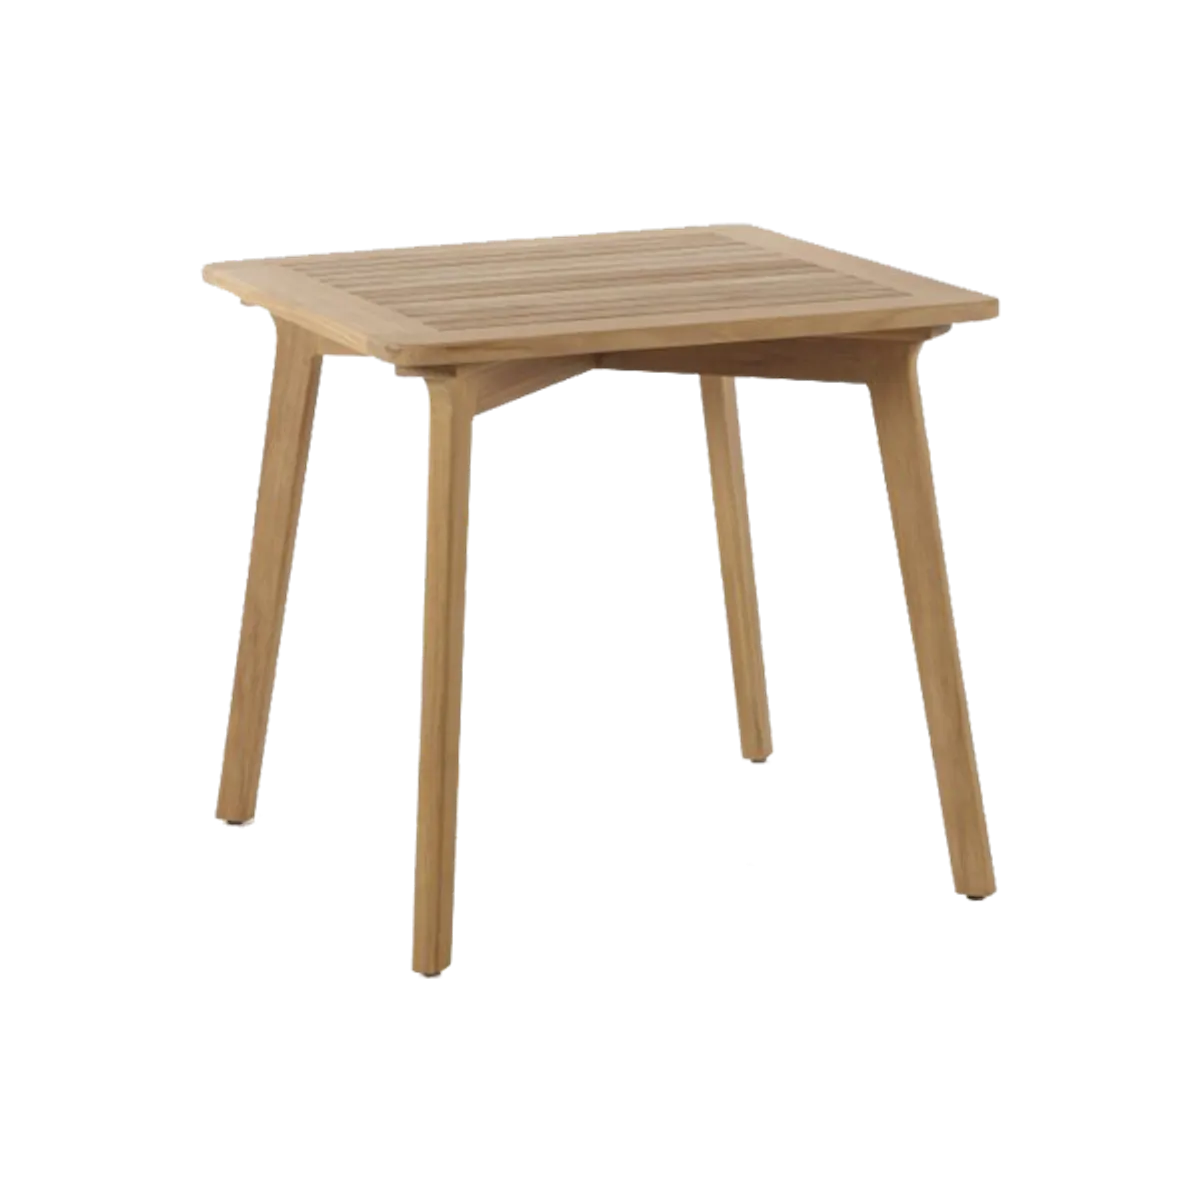 Carnelia small dining table Inside Out Contracts